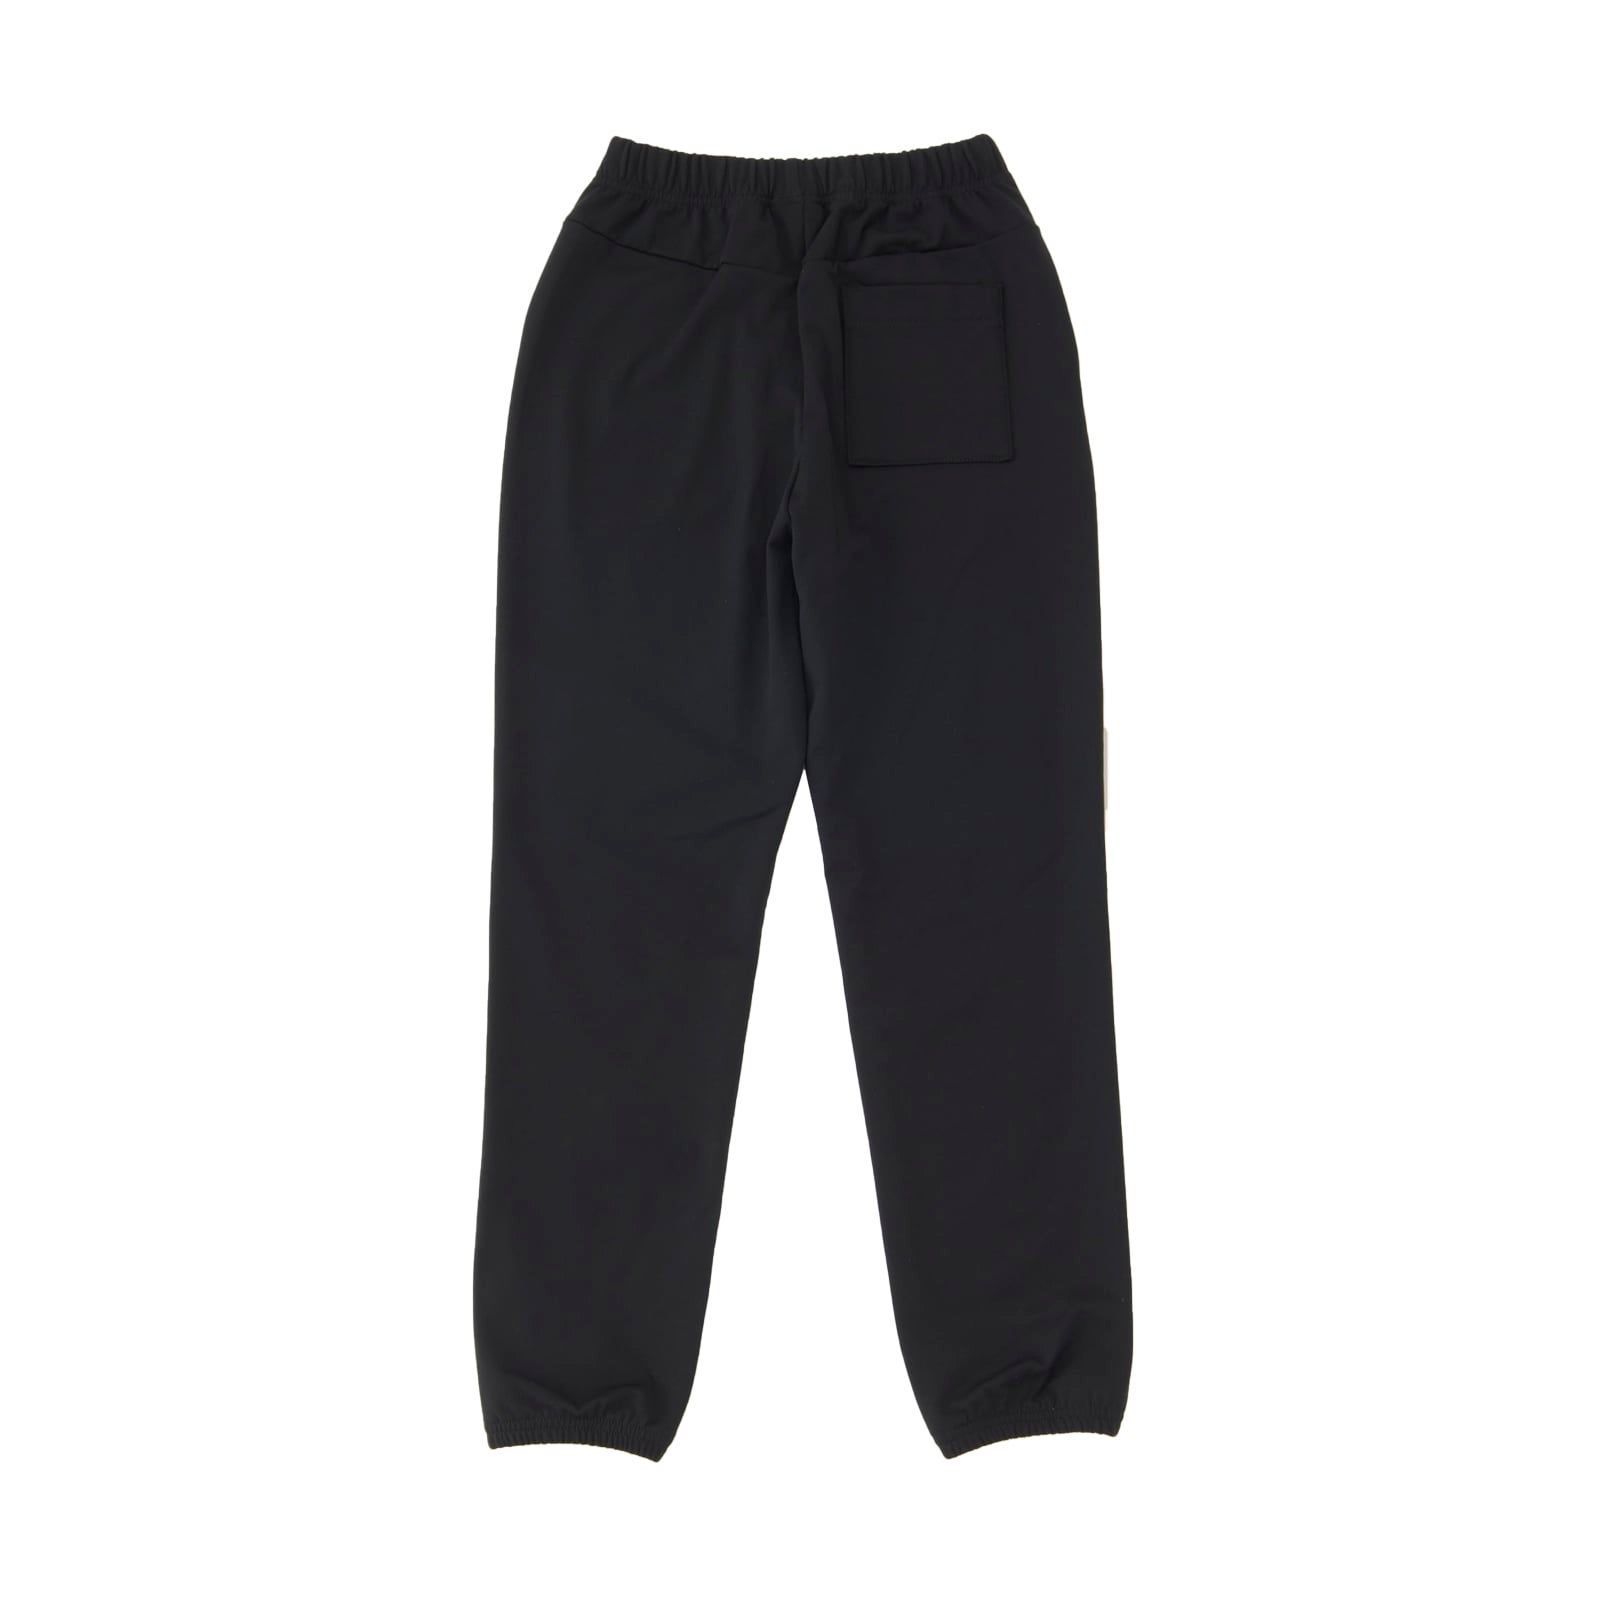 Moisture-wicking, quick-drying jogger pants